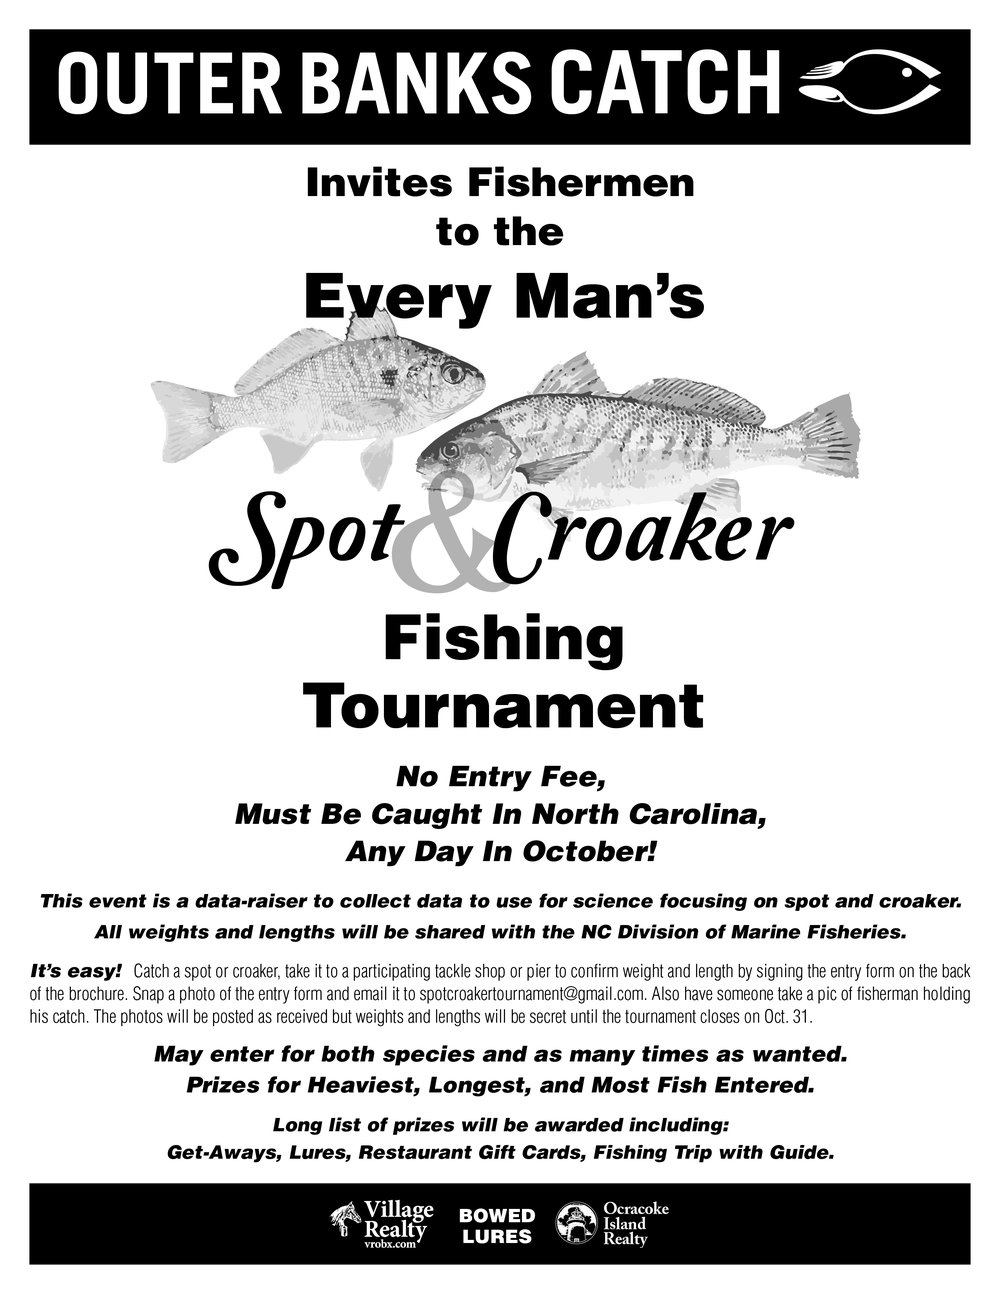 Outer%20banks%20catch%20every%20man%27s%20spot%20and%20croacker%20fishing%20tournament